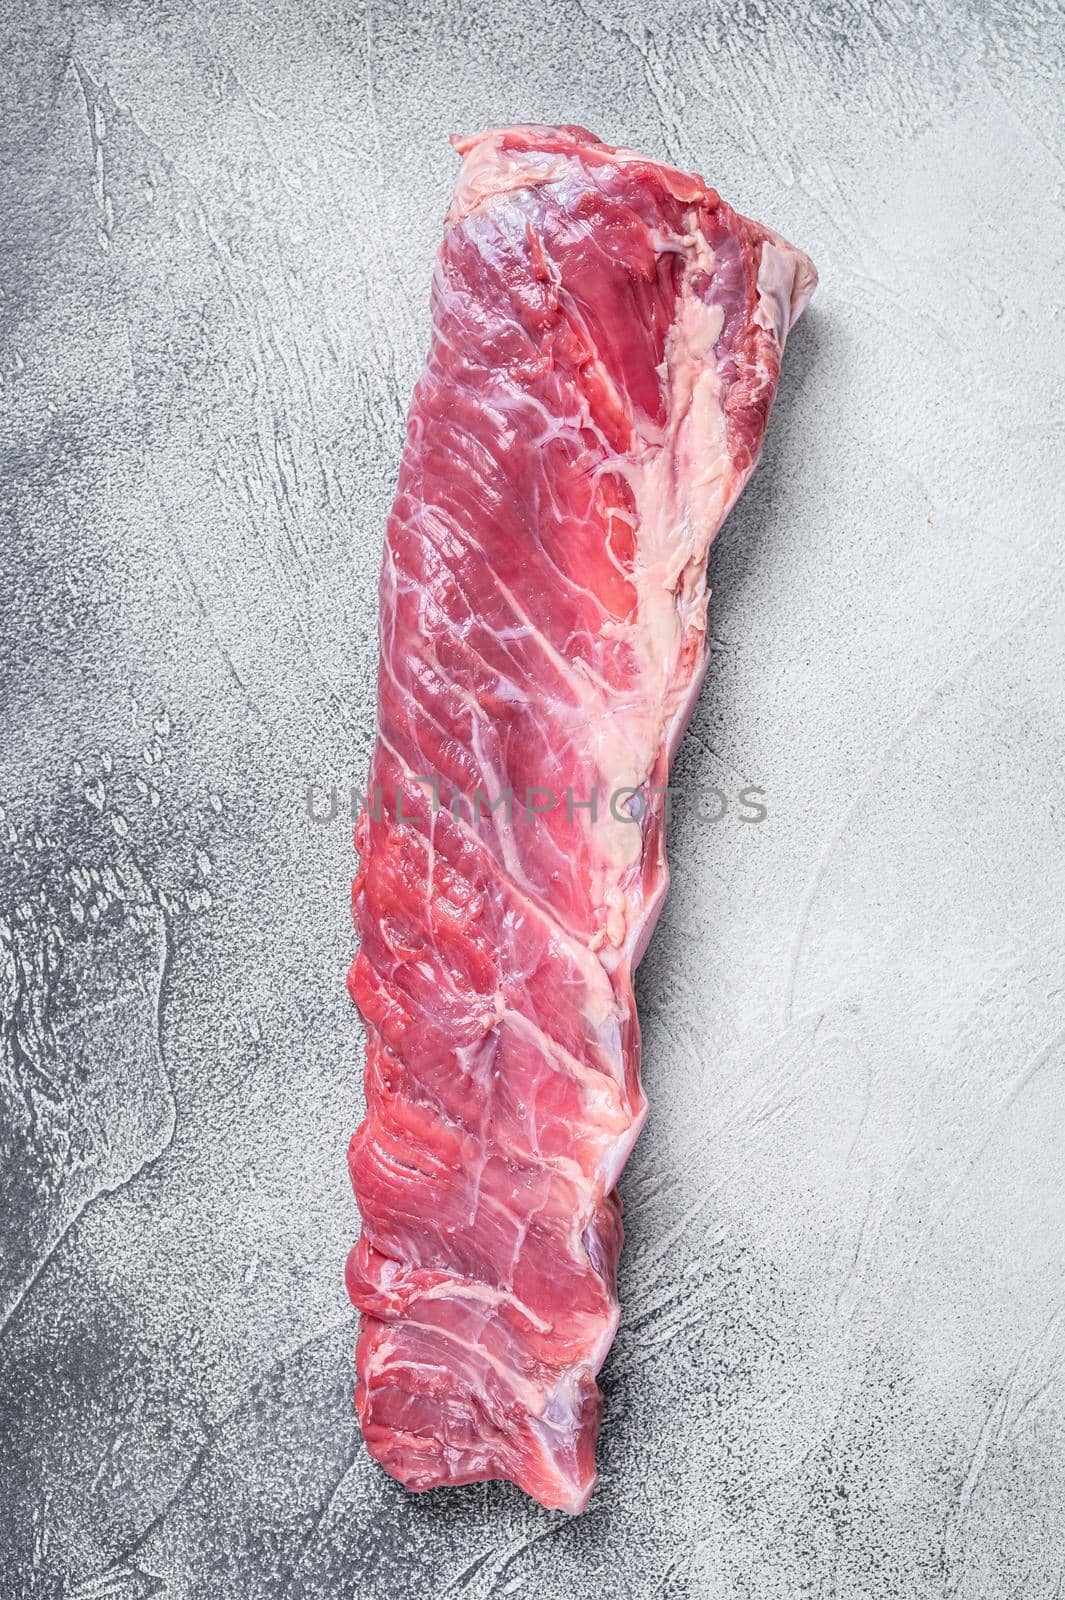 Raw veal calf short spare rib meat. White background. Top view by Composter